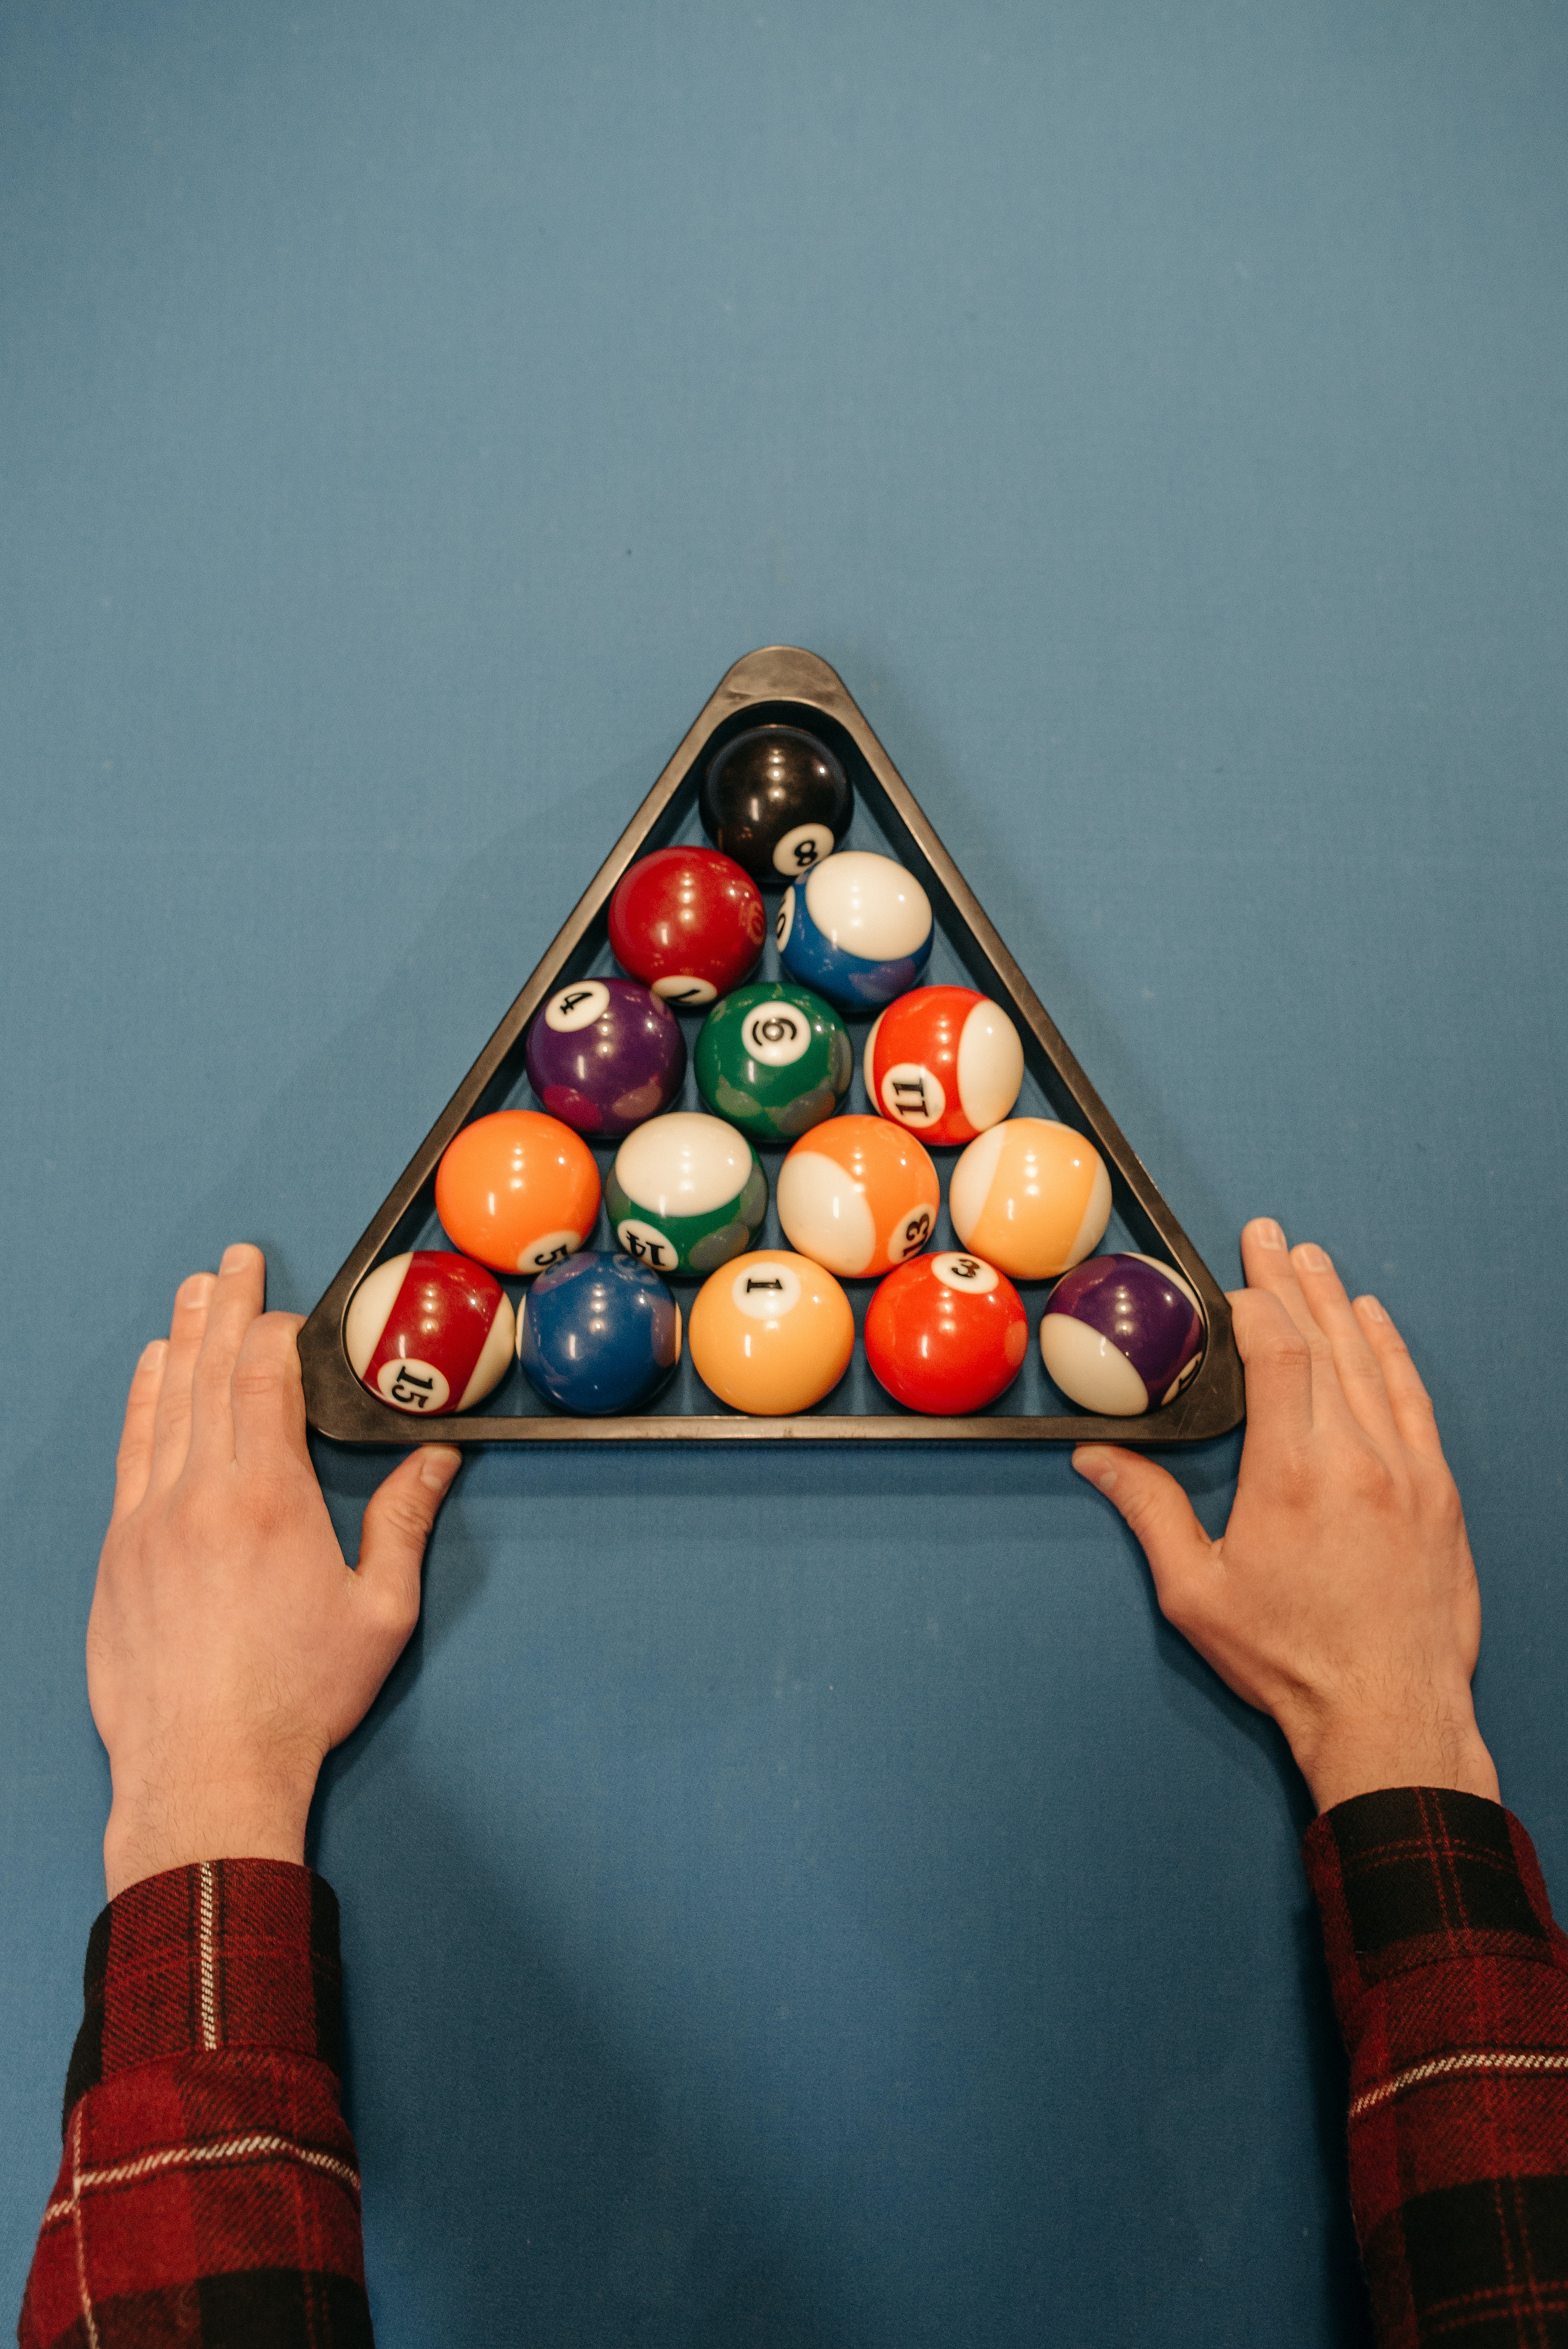 A rack of billiard balls with cue stick and cue ball